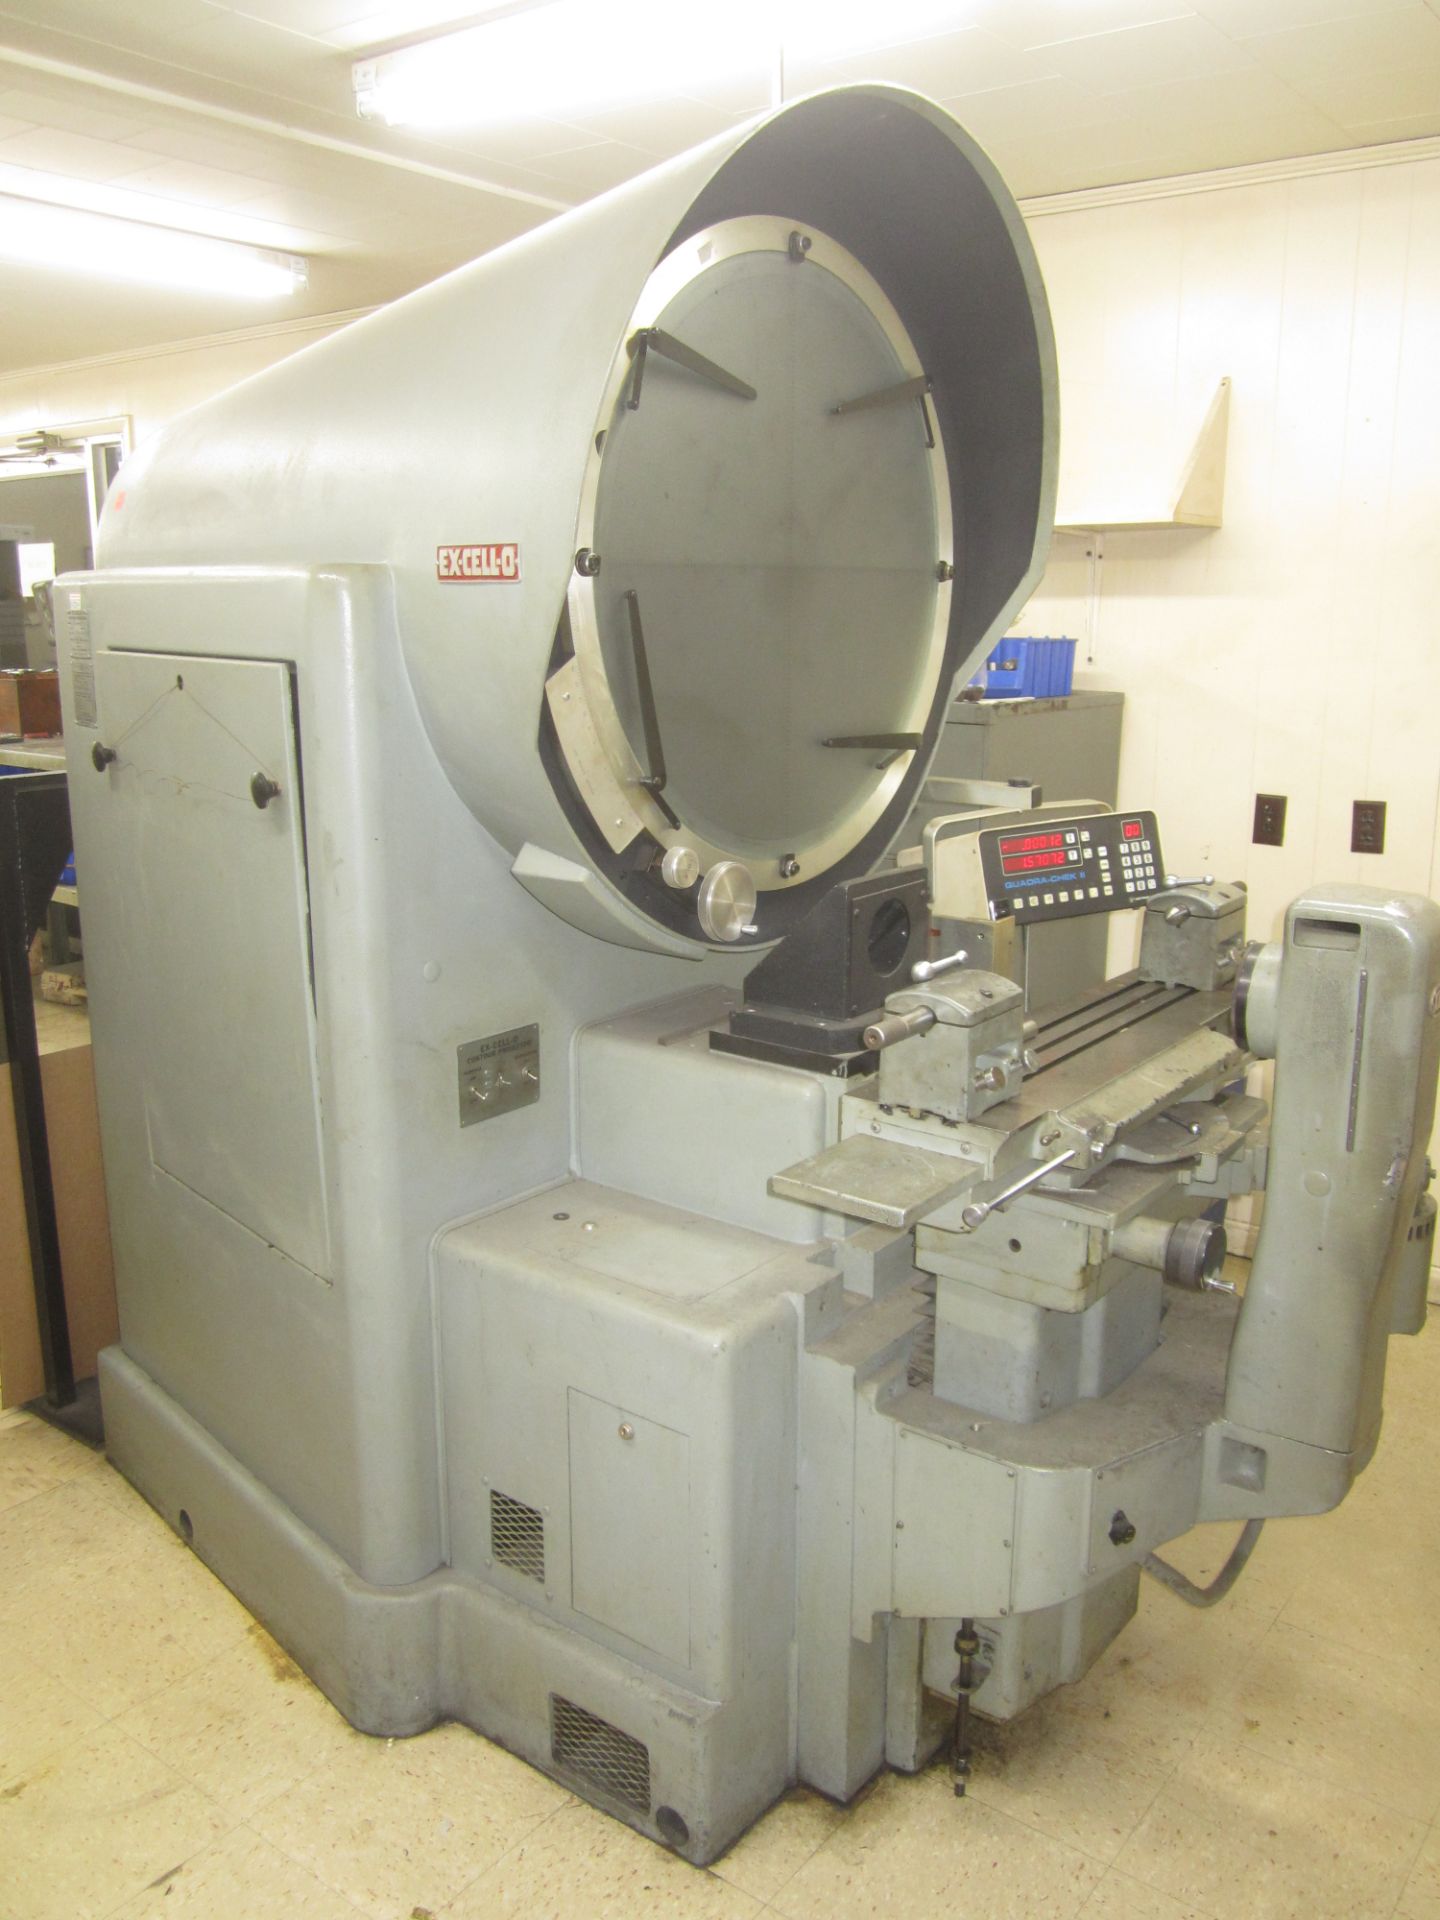 Excello Model 30-826. 30" Optical Comparator, s/n 82603 342, Power Elevation to Table, Quadra Chek